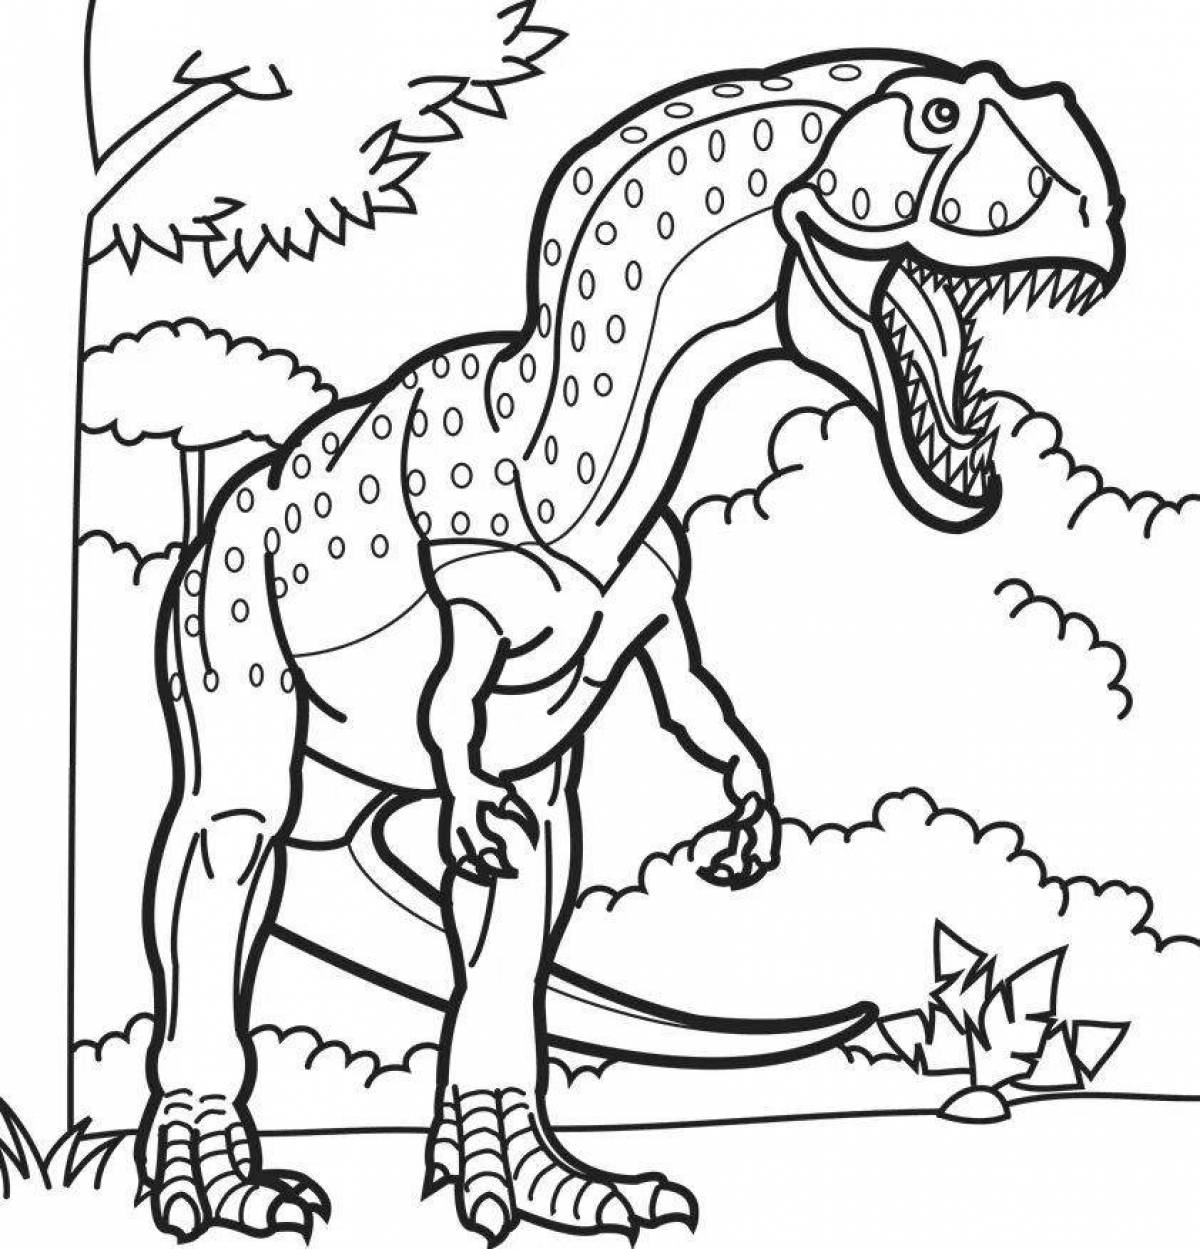 Colorful dinosaur coloring page